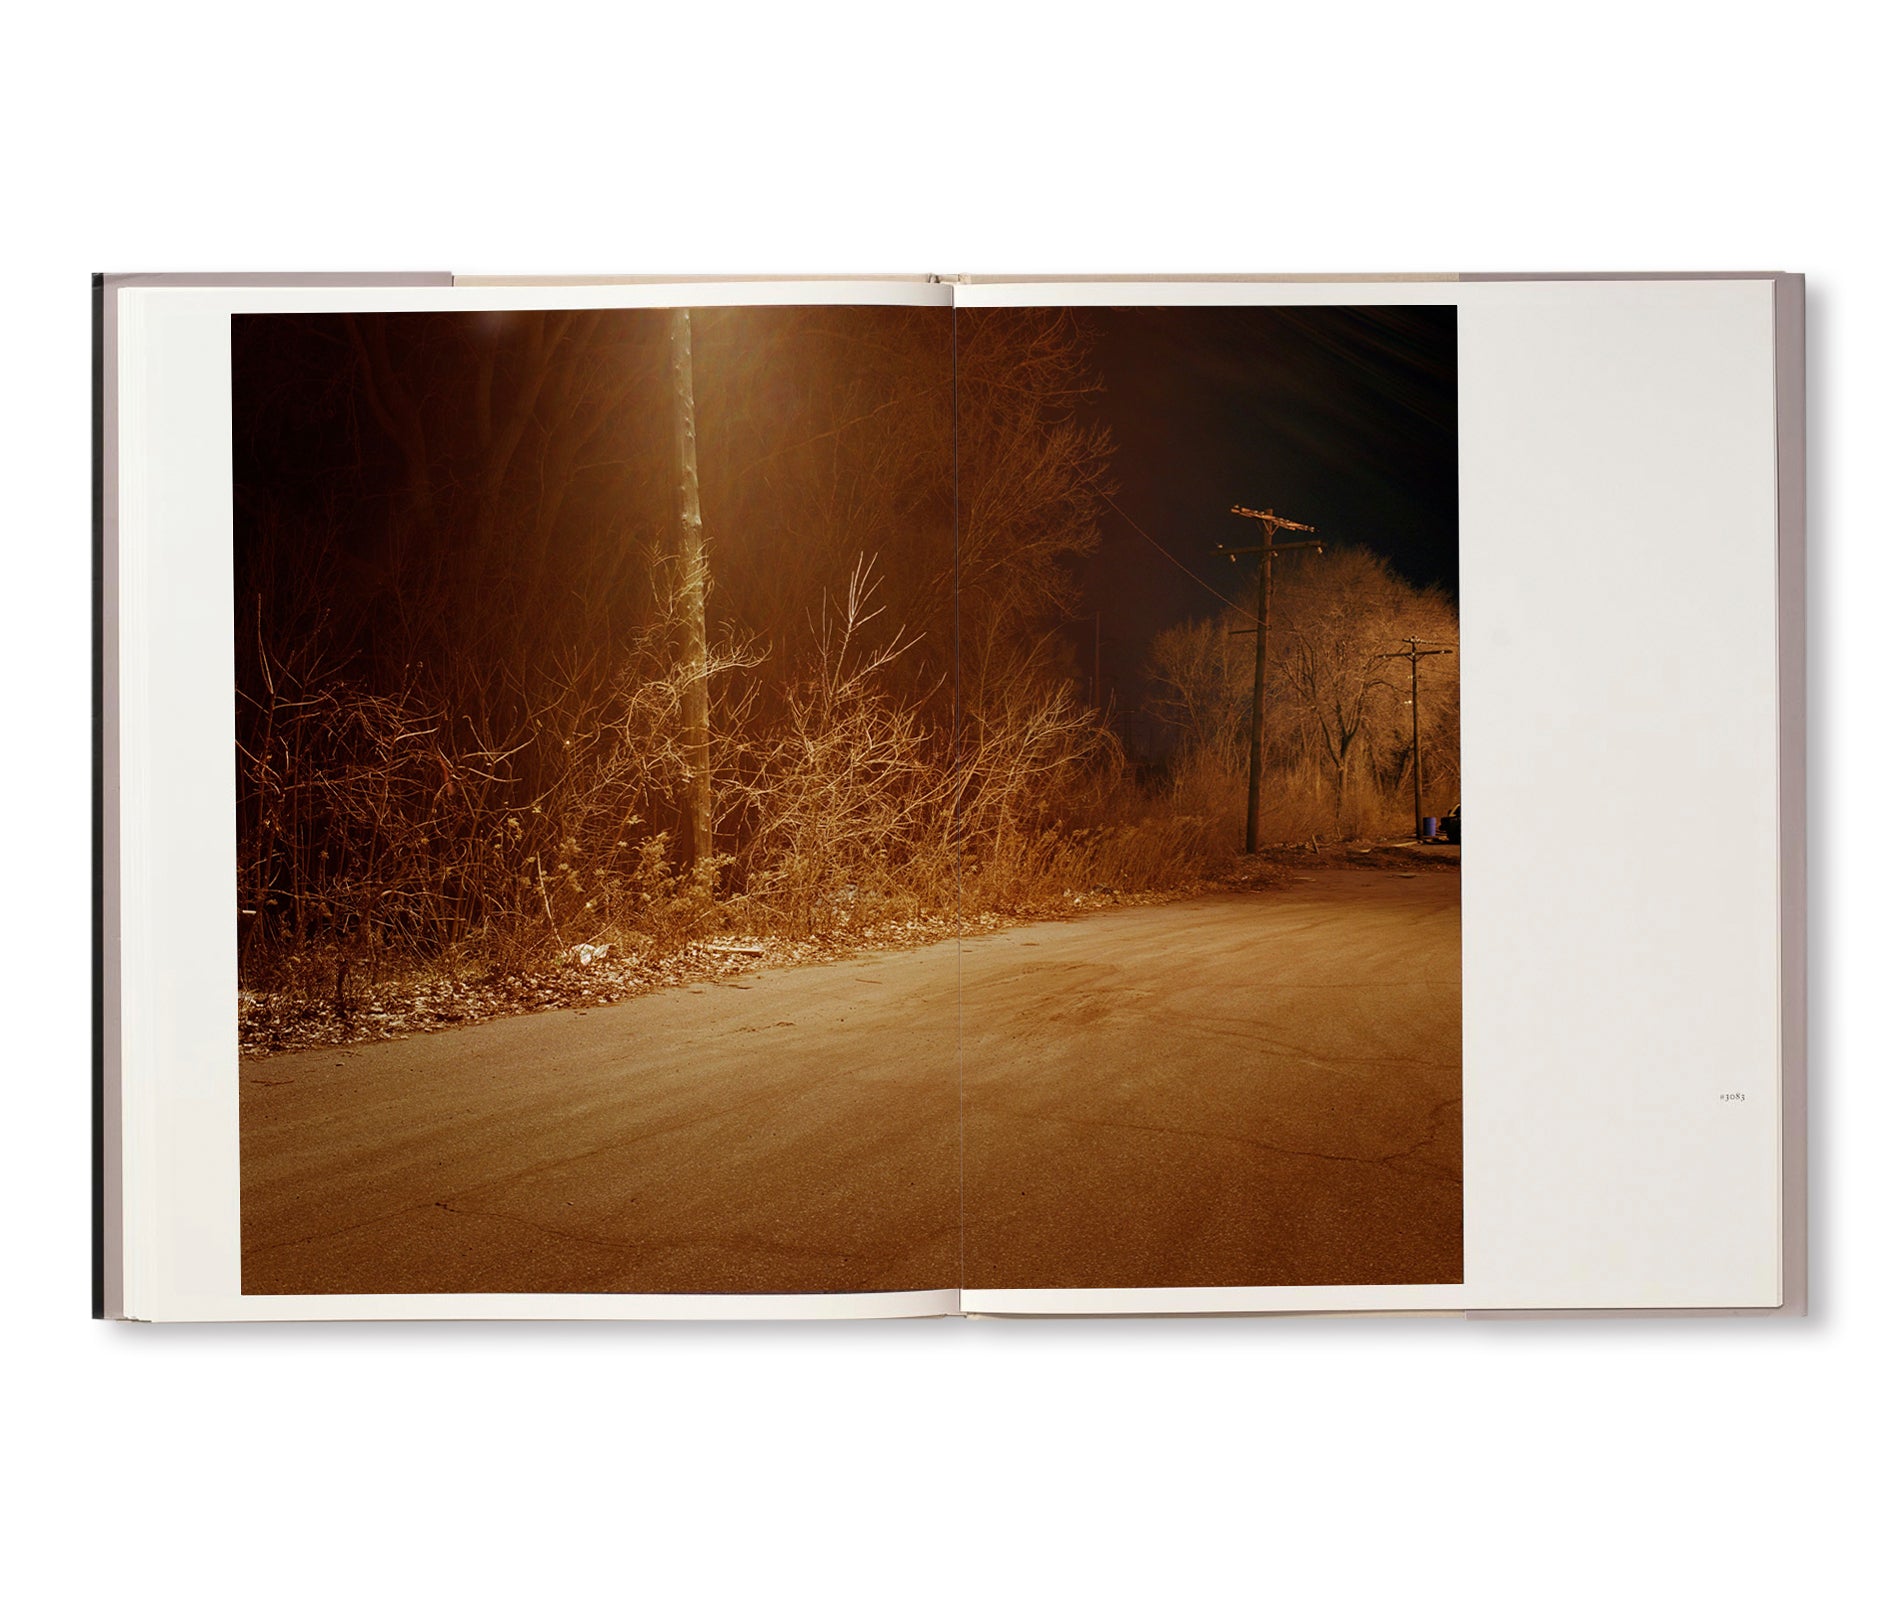 OUTSKIRTS by Todd Hido [DELUXE EDITION]